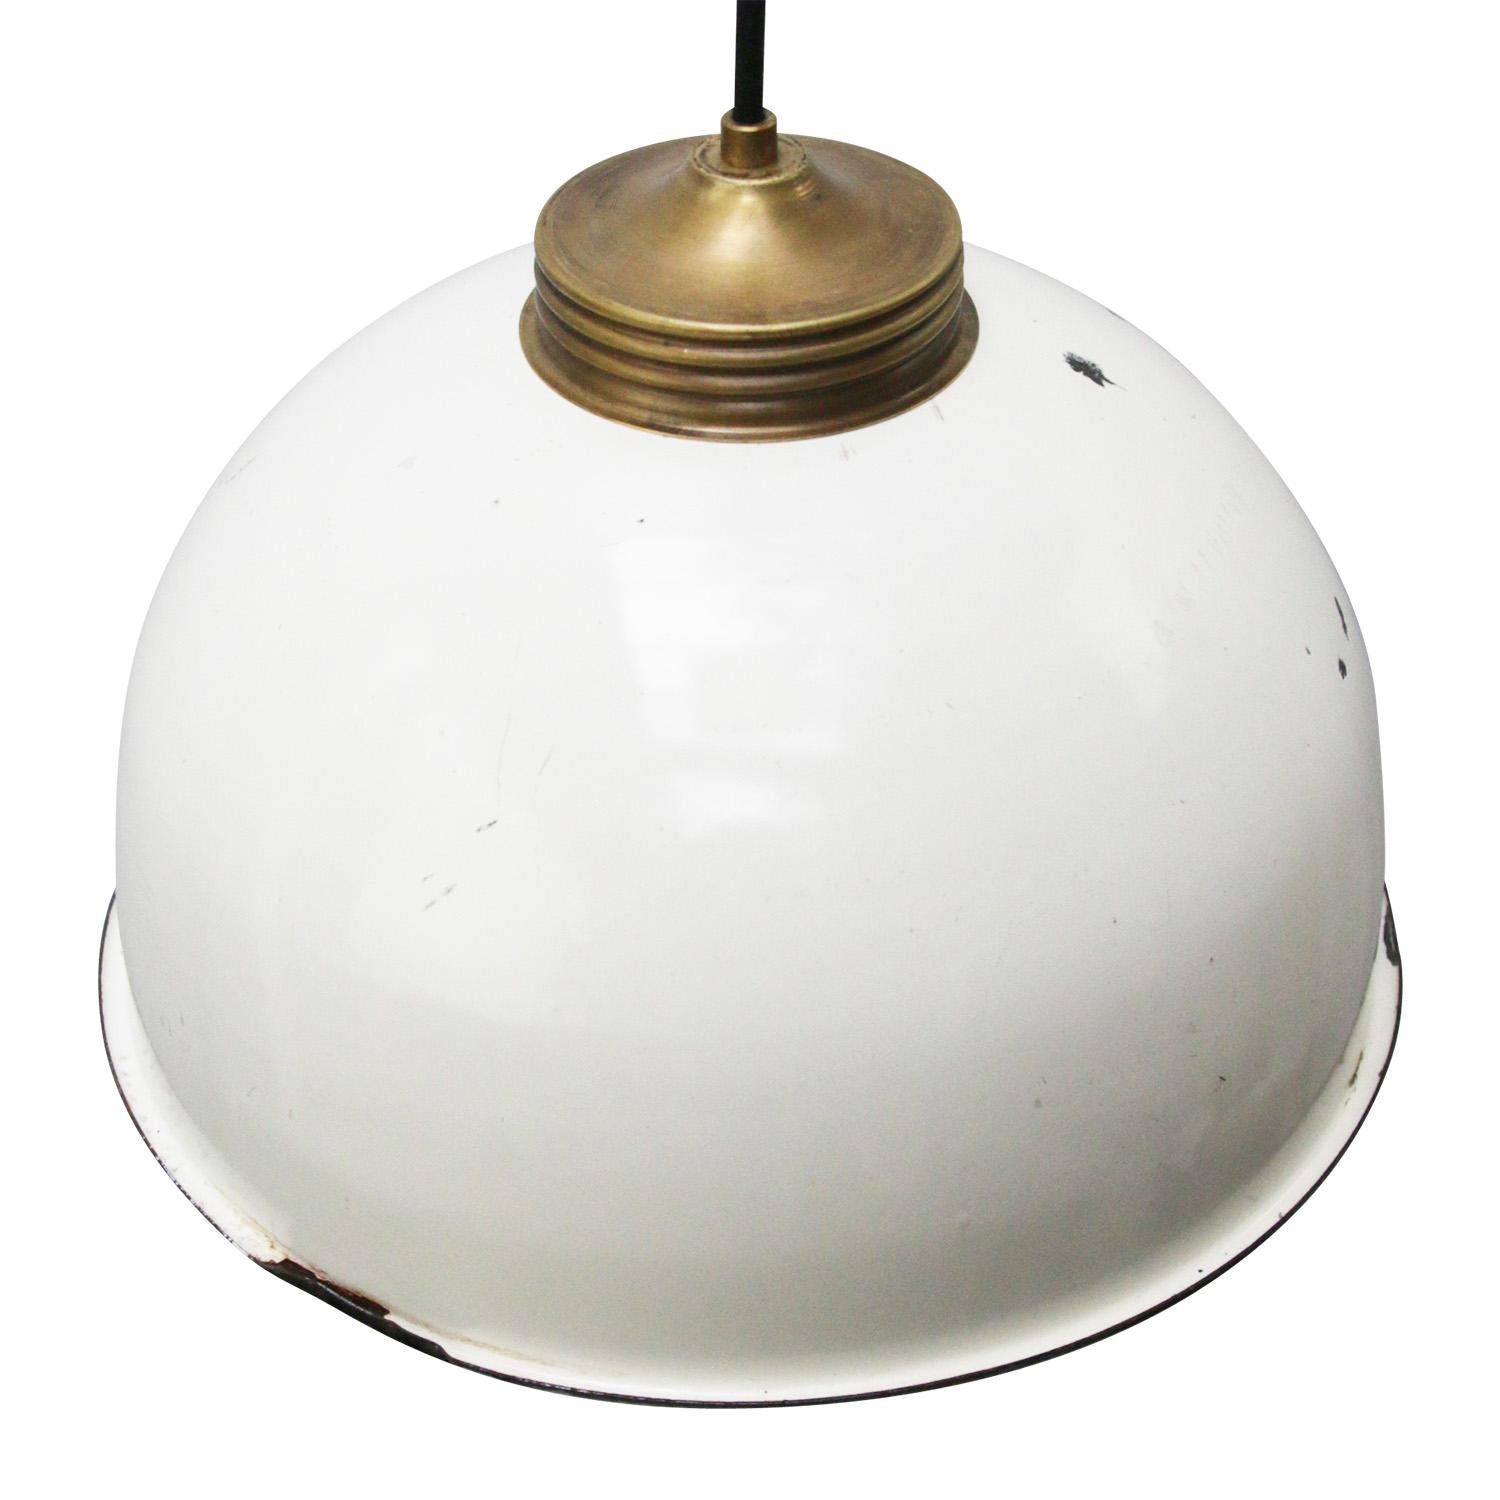 White enamel Industrial hanging lamp.
Brass top.

Weight: 1.70 kg / 3.7 lb

Priced per individual item. All lamps have been made suitable by international standards for incandescent light bulbs, energy-efficient and LED bulbs. E26/E27 bulb